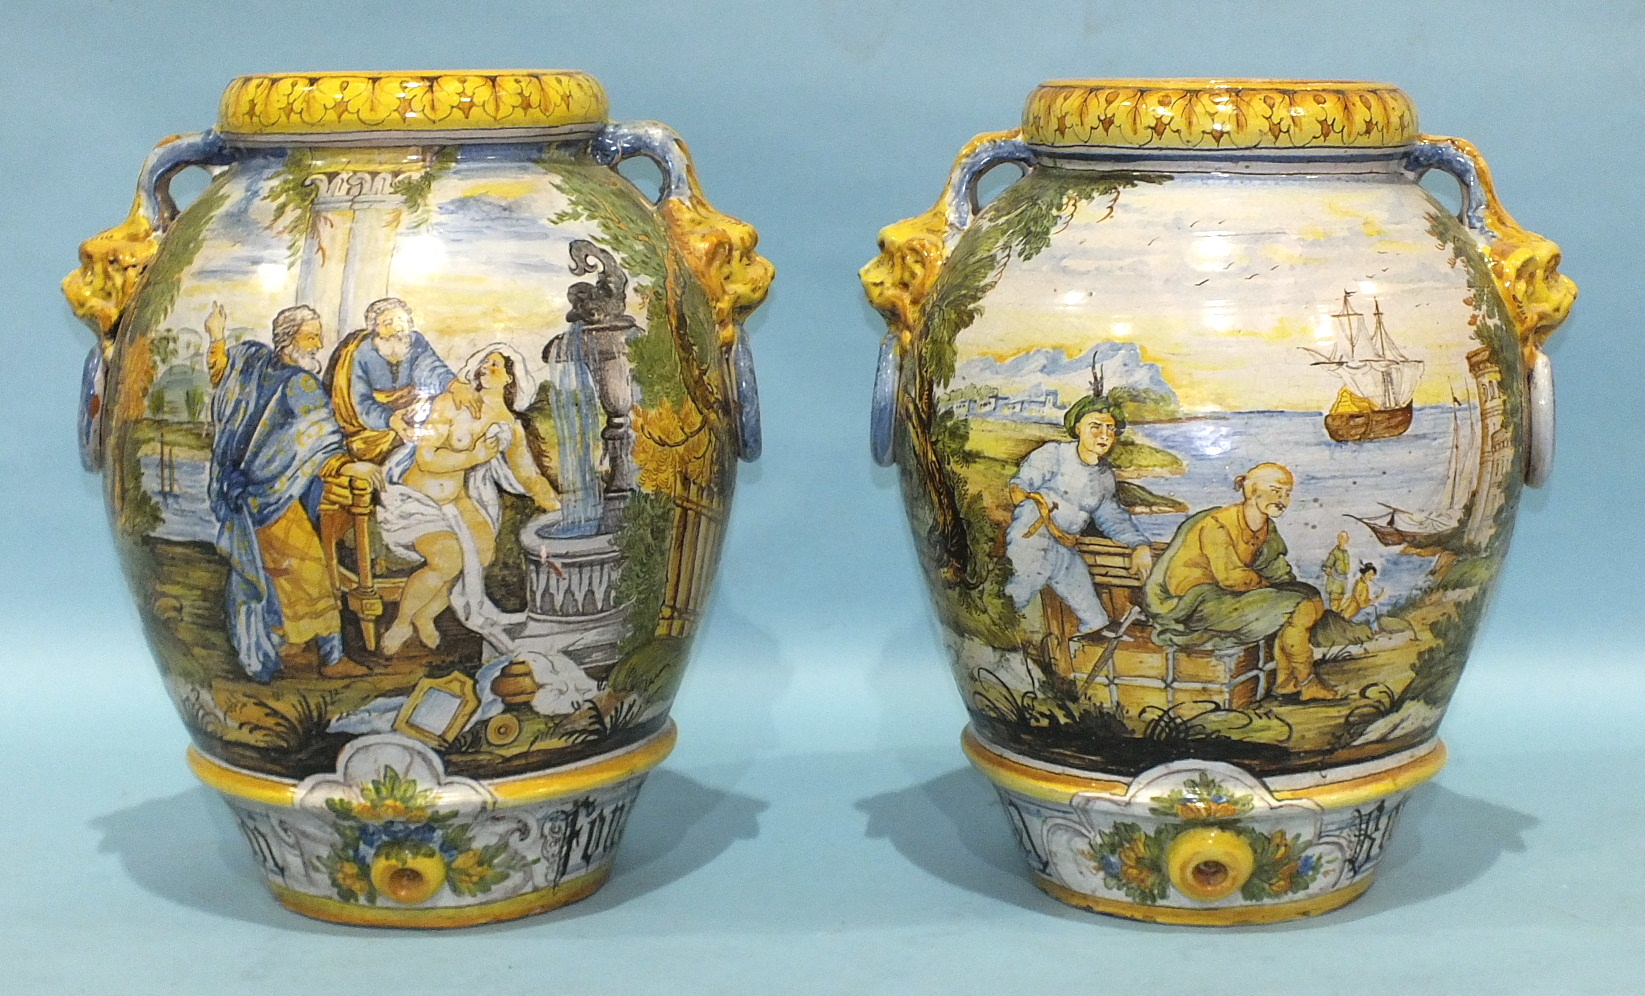 A large pair of Italian Faïence majolica jars in the 16th century style, one decorated with - Image 2 of 2